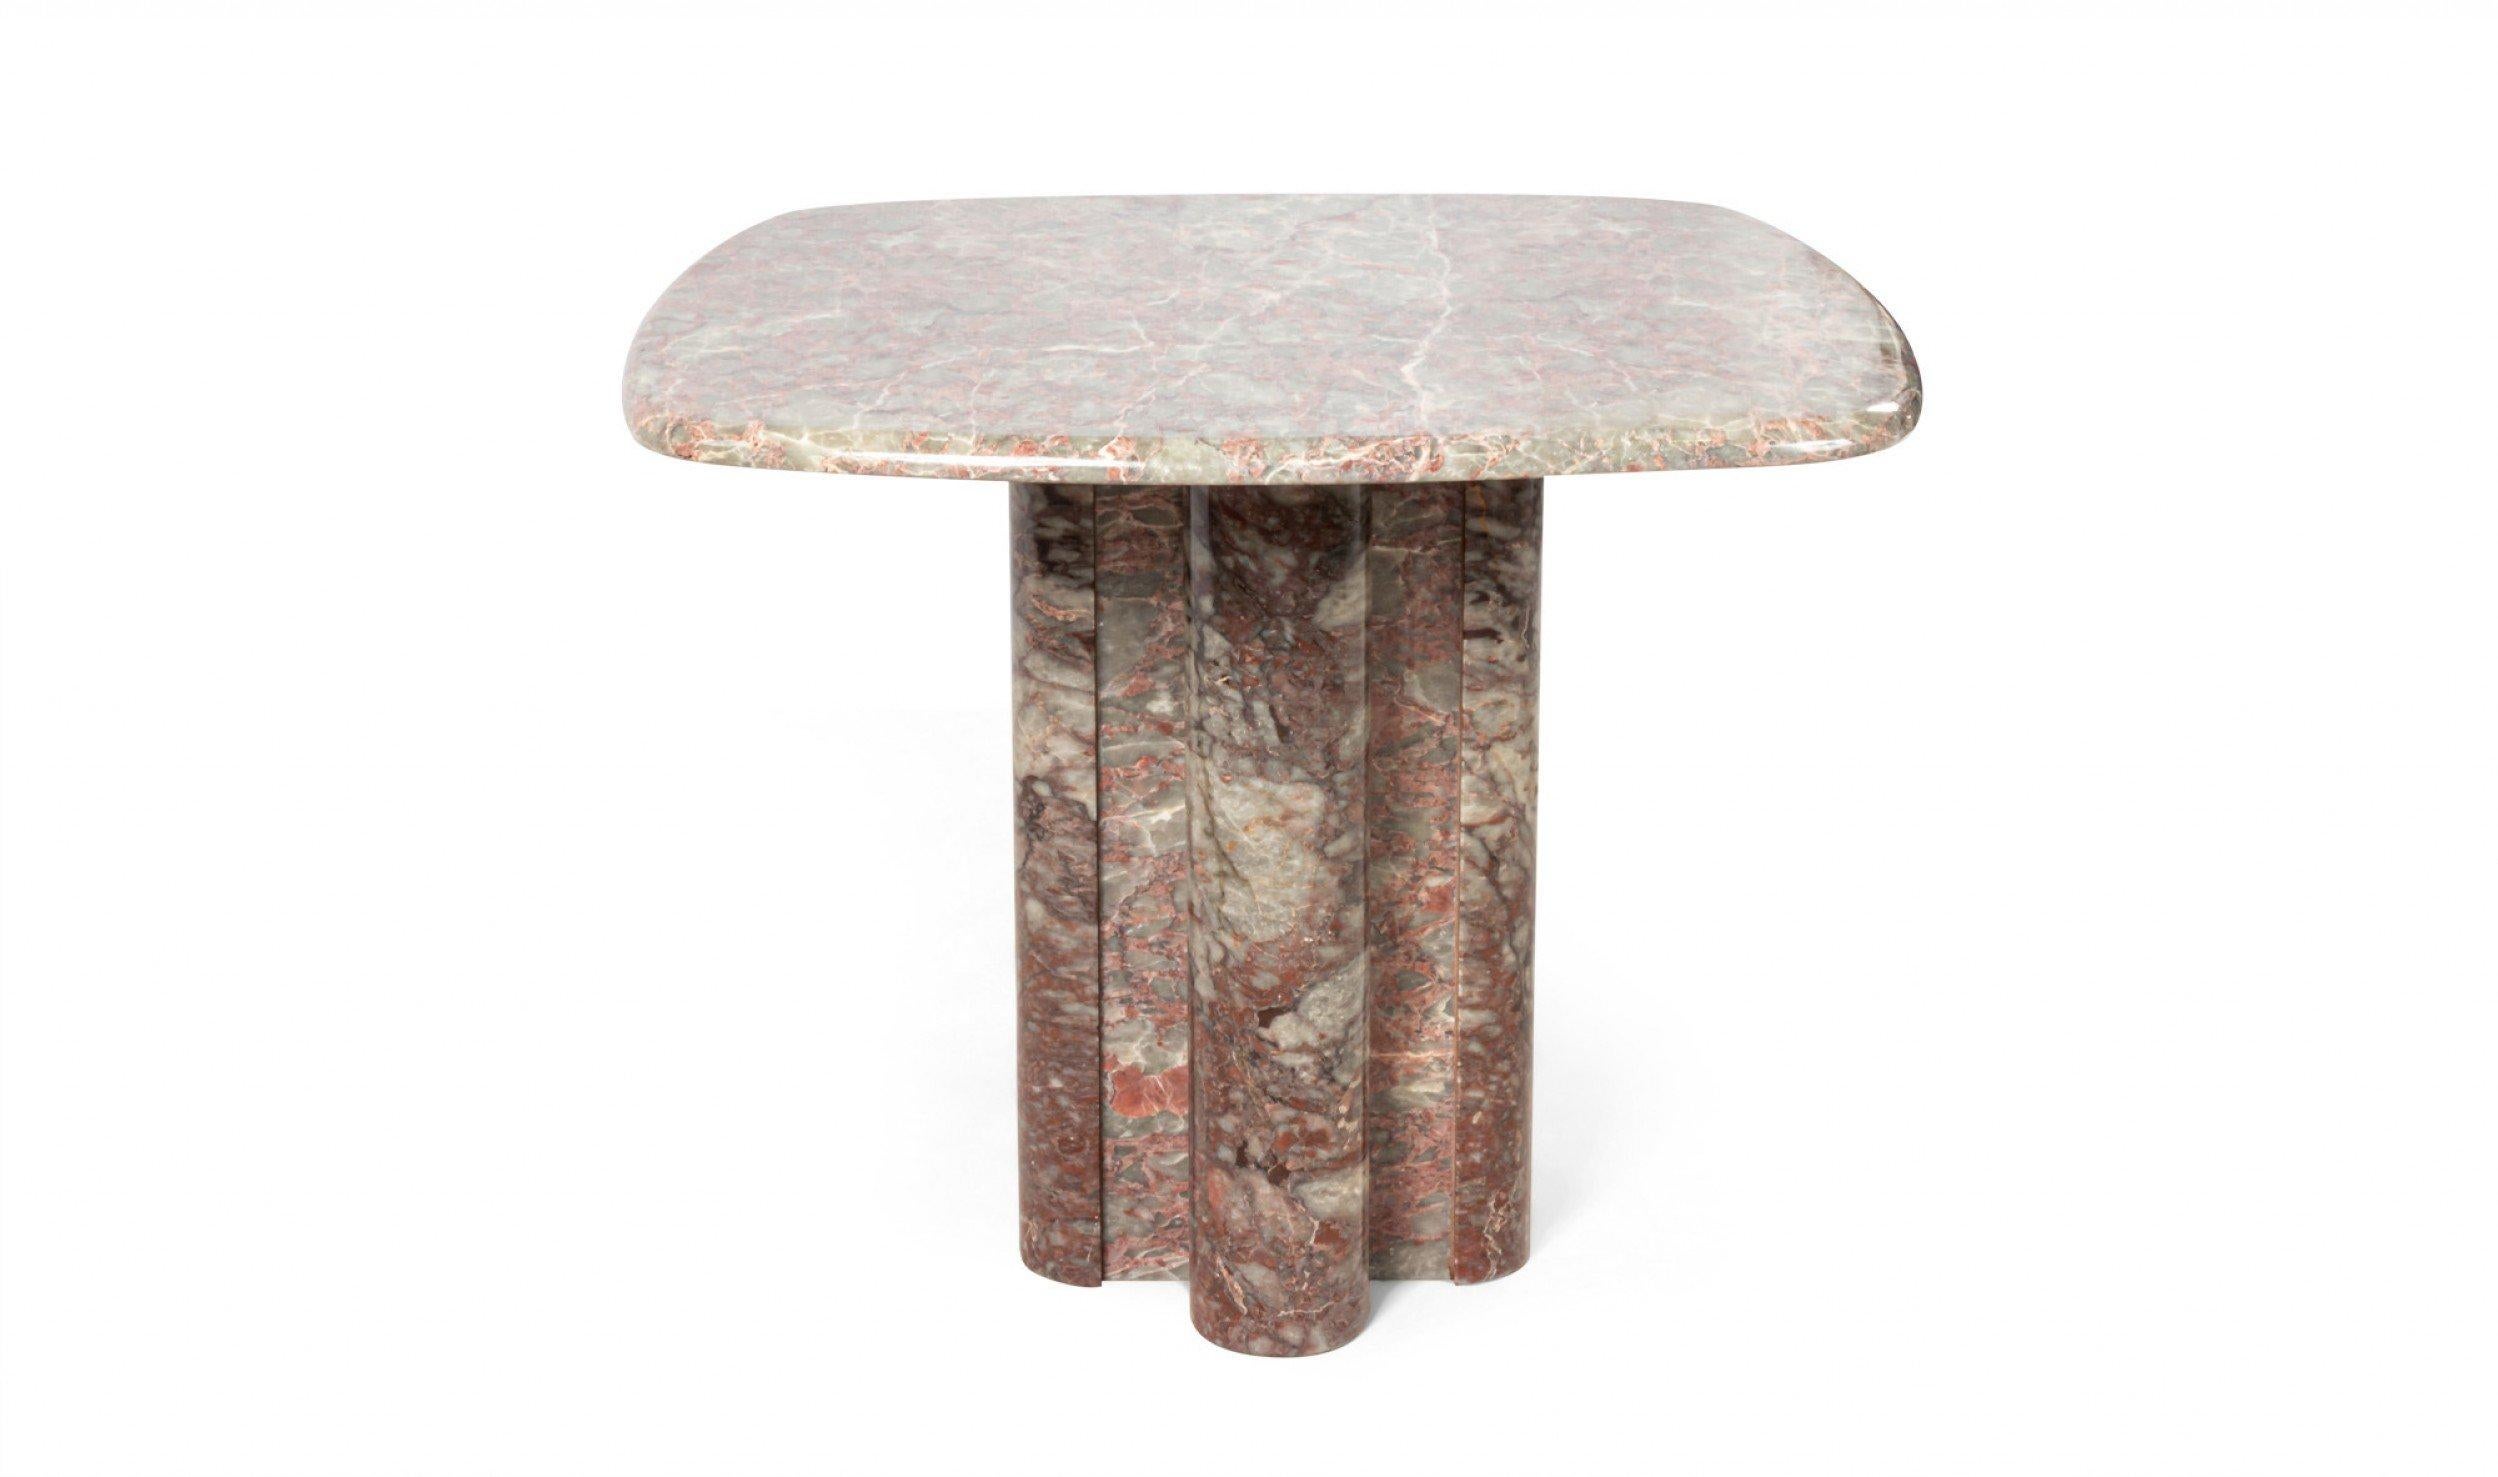 Pair of midcentury Italian red and gray marble end tables with square tops with rounded corners and lobed pedestal bases.